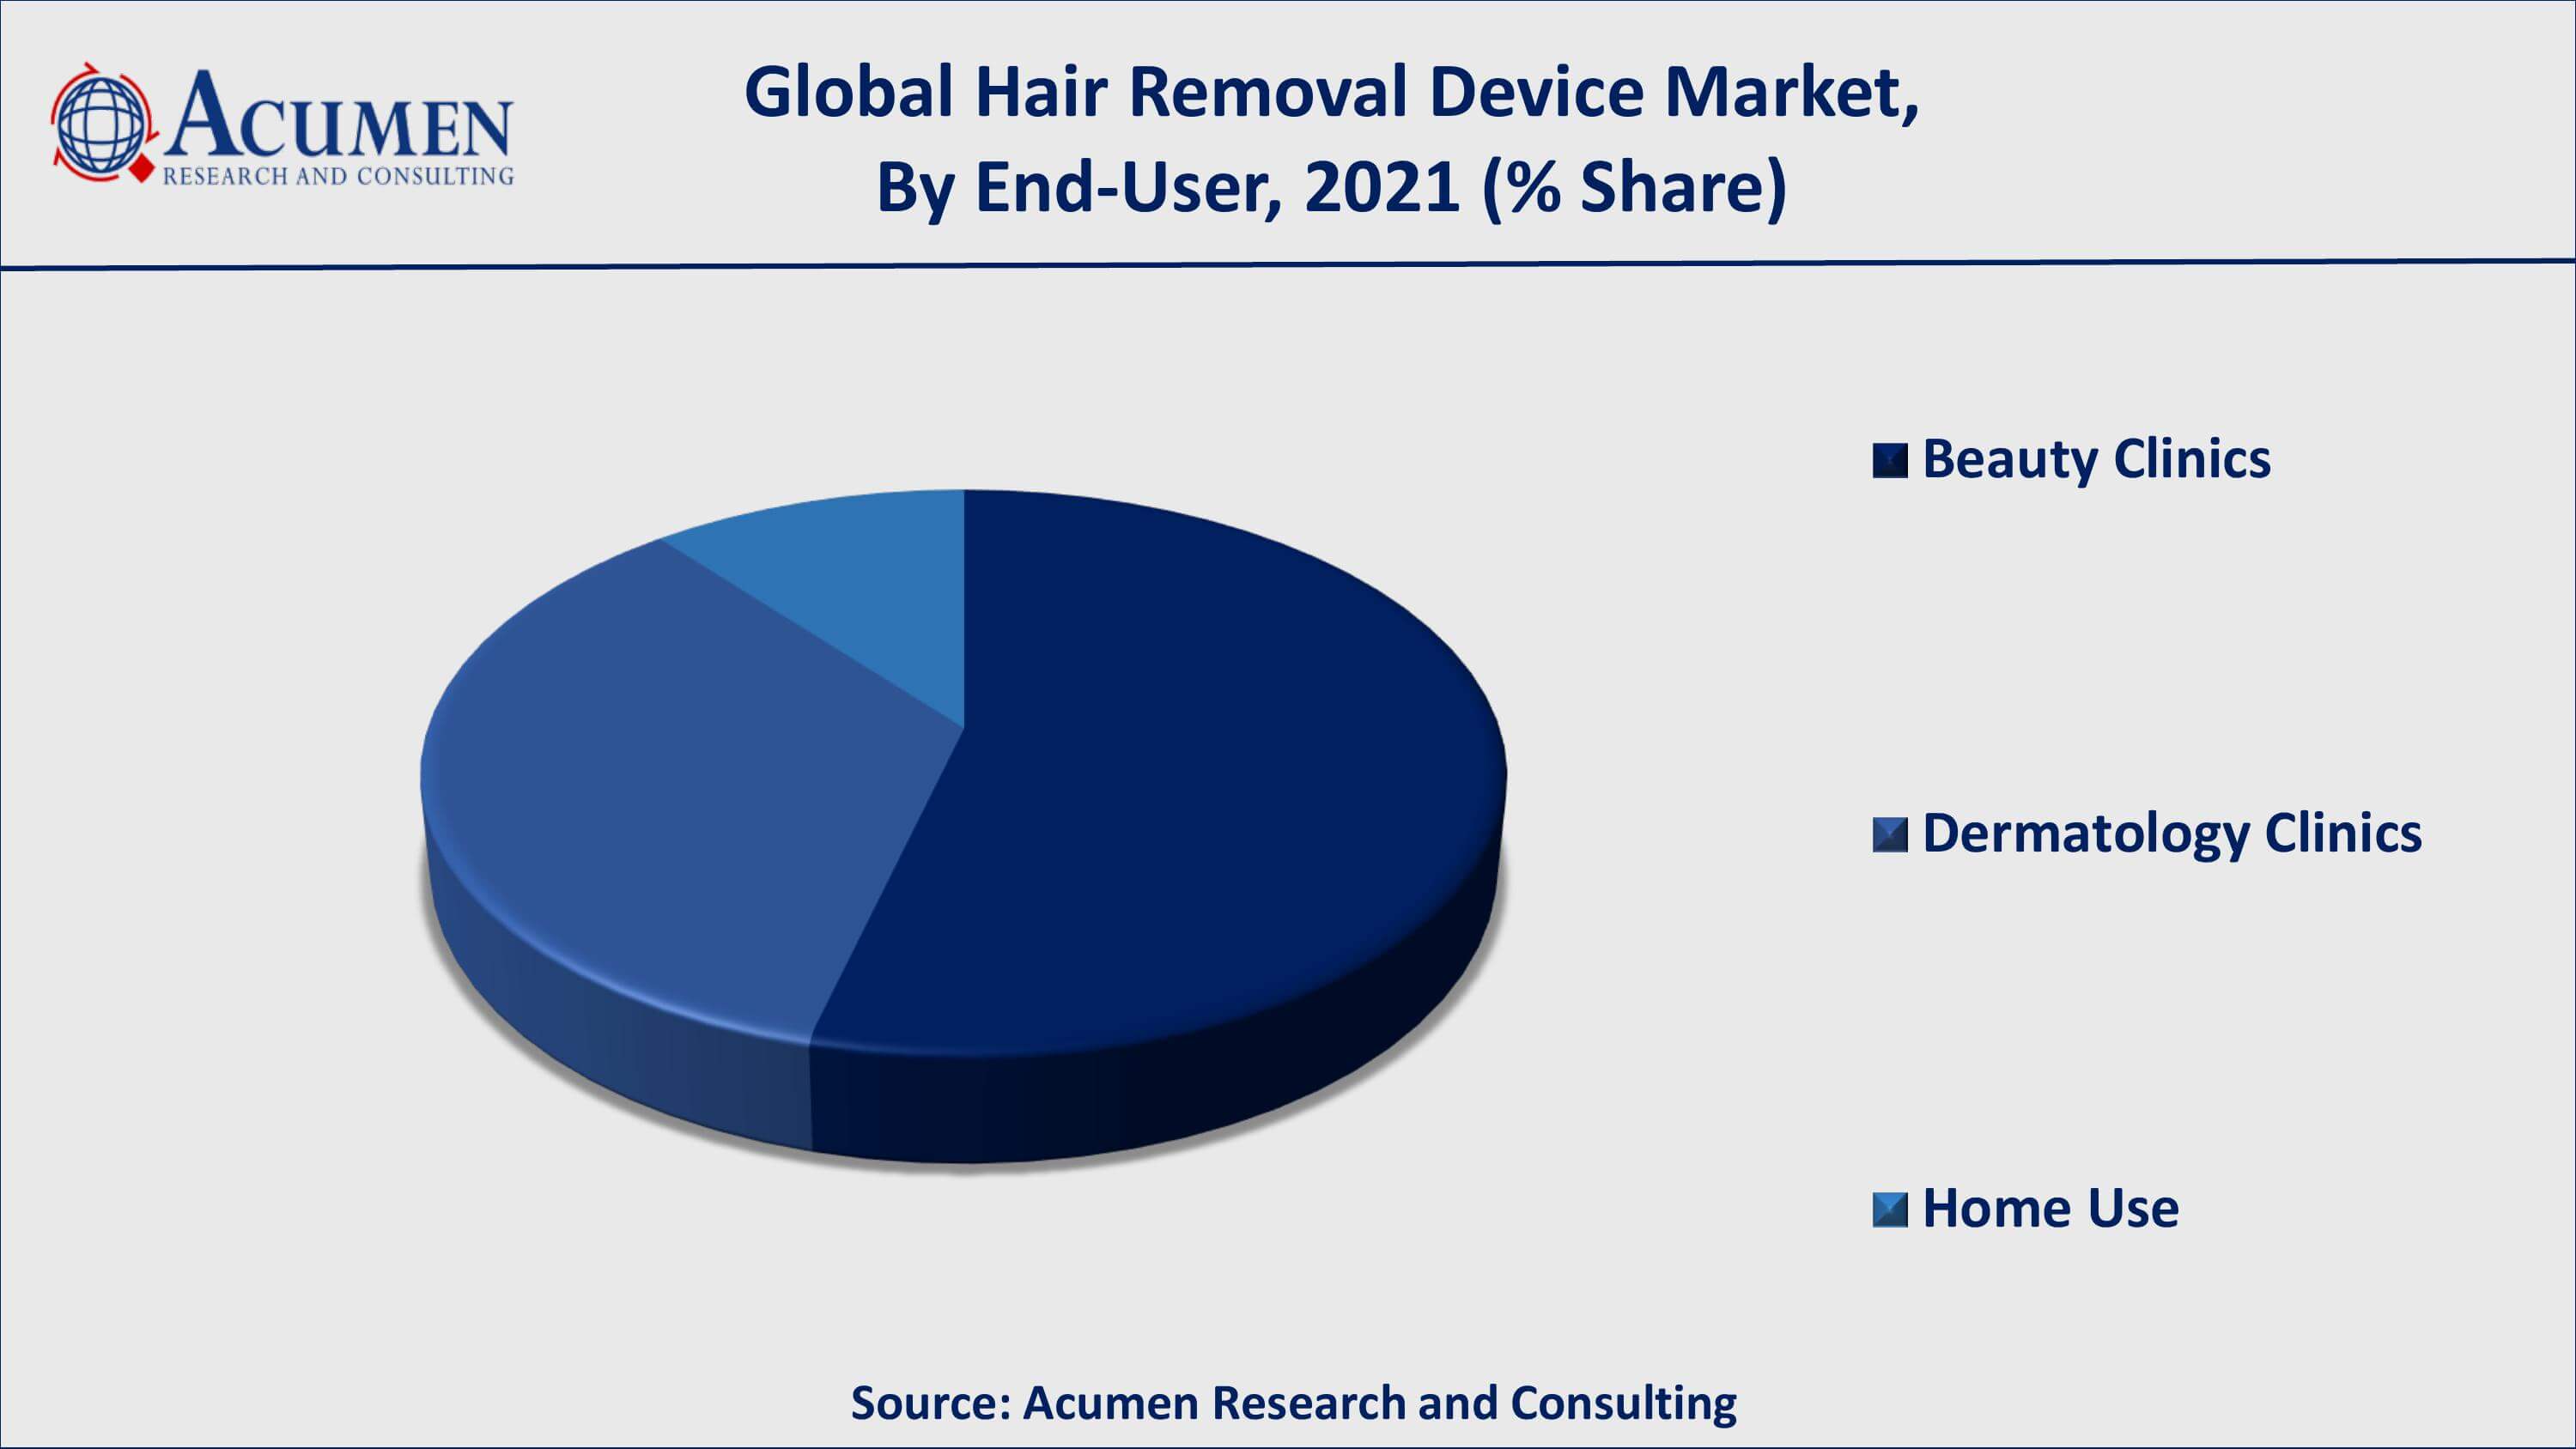 Among end-users, beauty clinics occupied more than 50% of the market share from 2022 to 2030